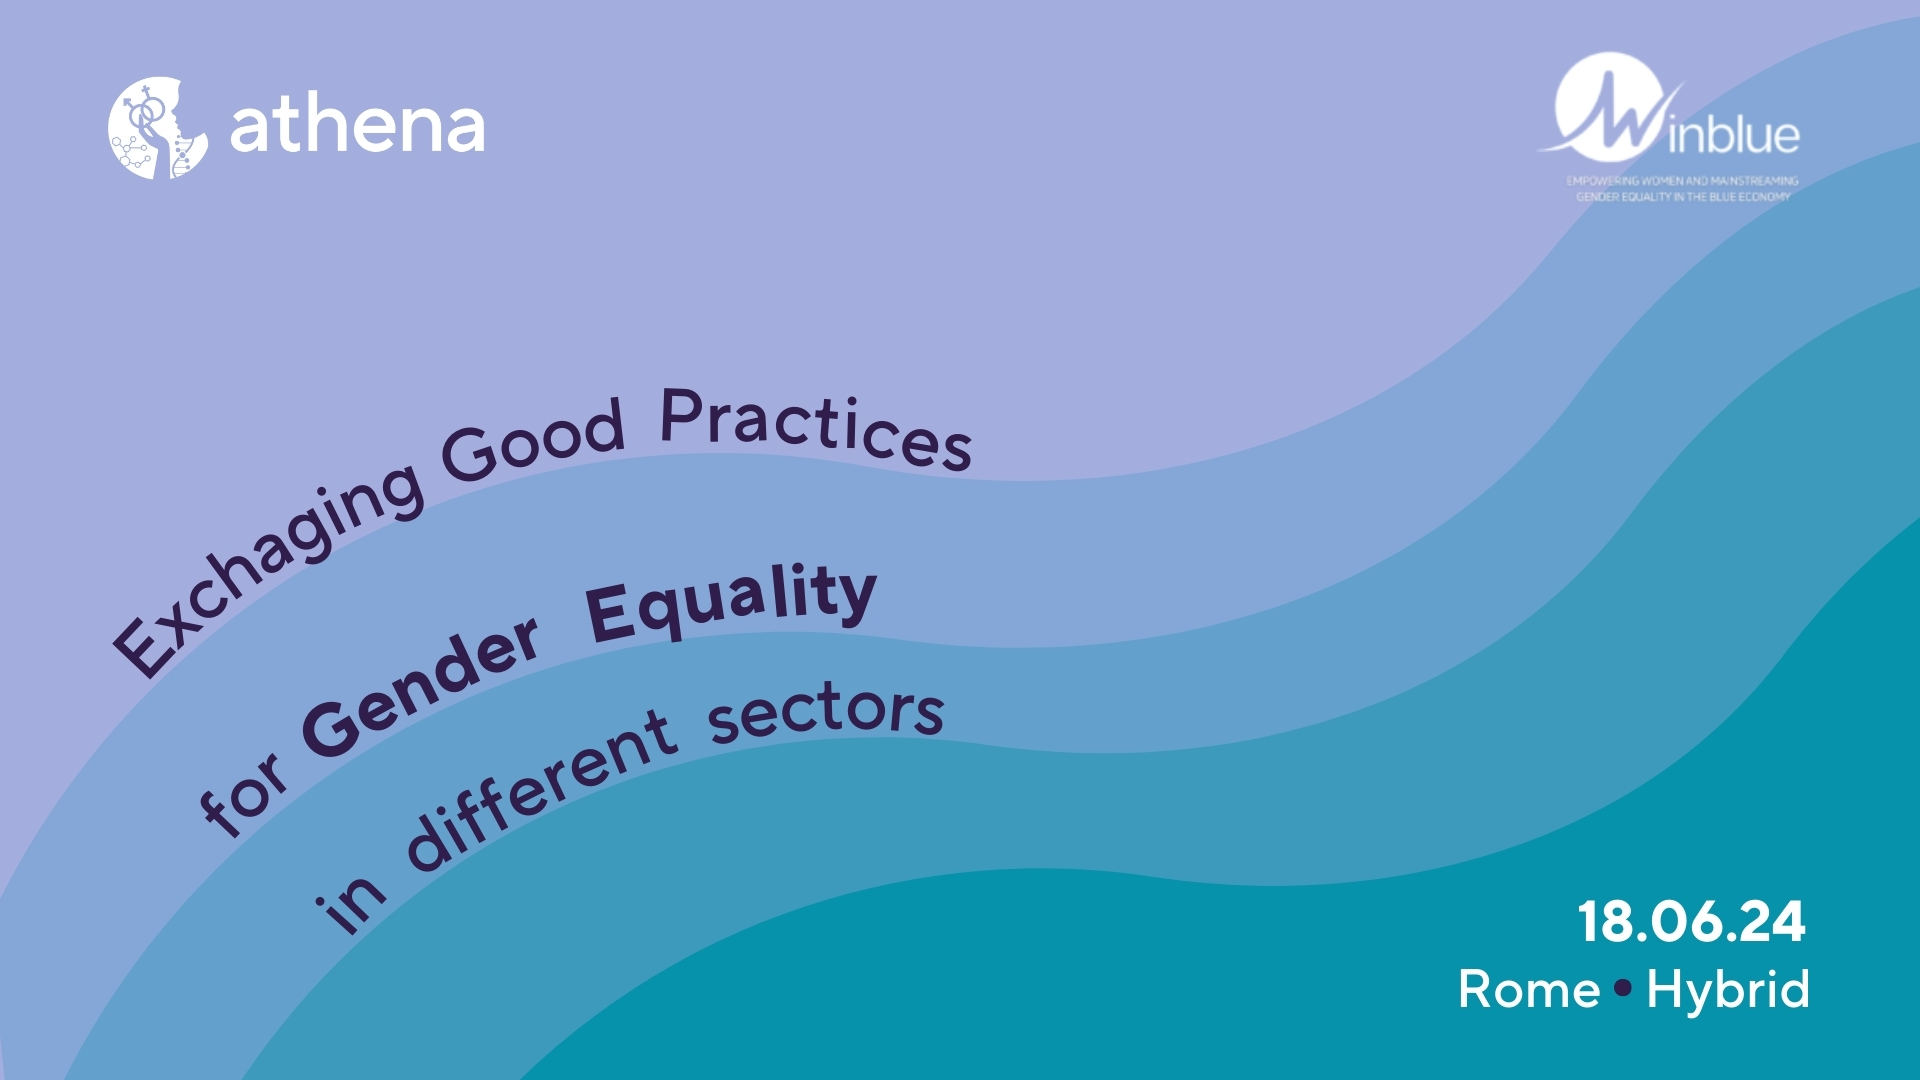 Workshop “Exchanging Good Practices for Gender Equality in different sectors”